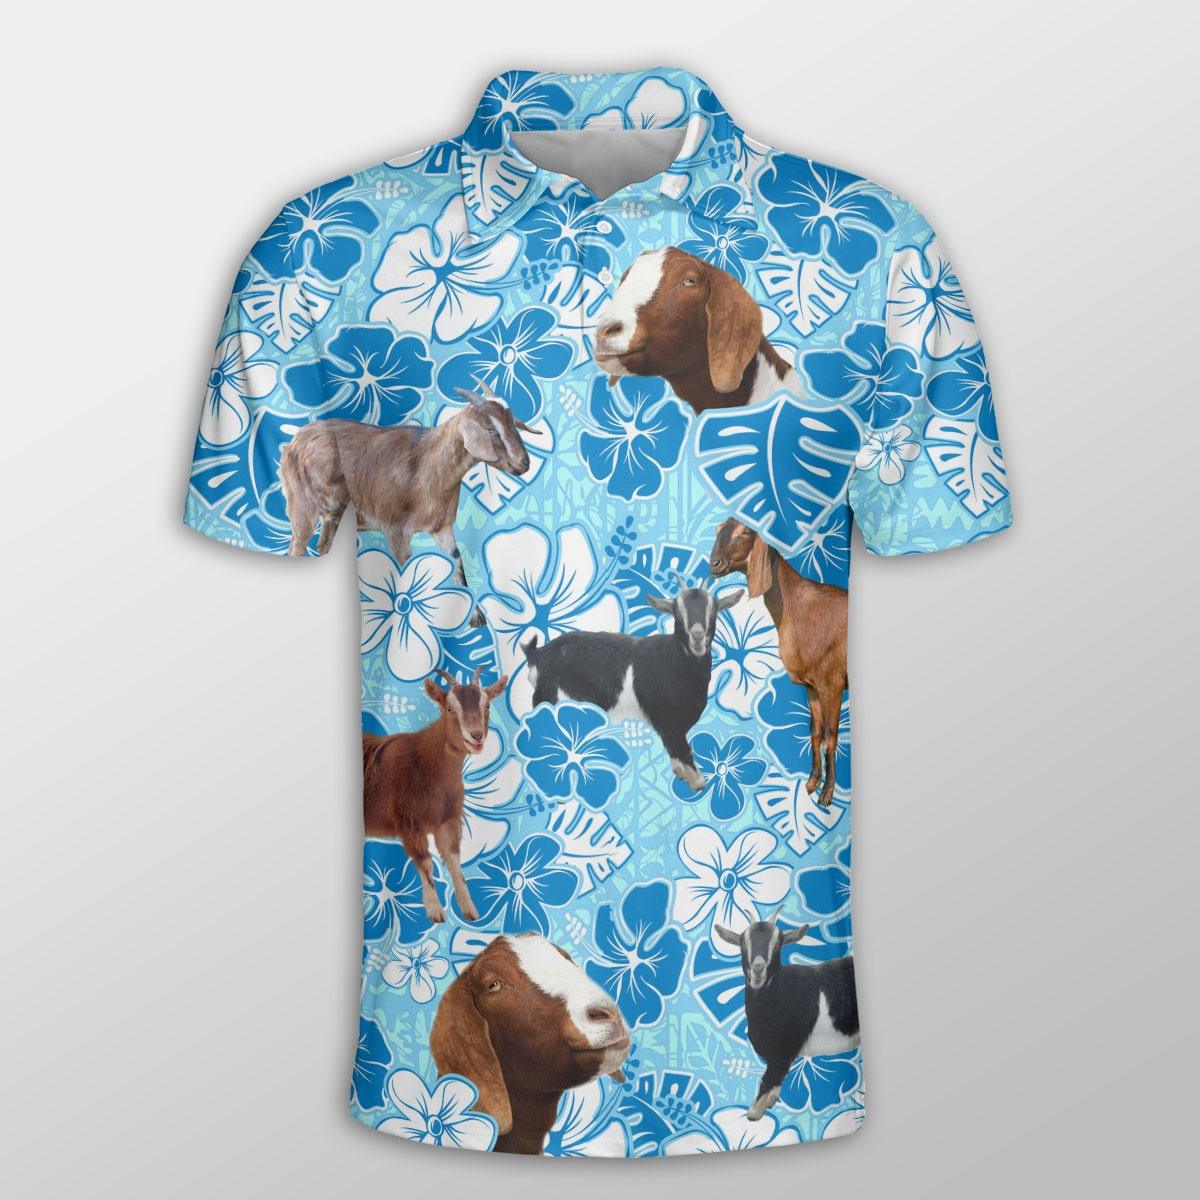 Nubian Goat Men Polo Shirts For Summer - Nubian Goat Blue Floral Button Shirts For Men - Perfect Gift For Nubian Goat Lovers, Cattle Lovers - Amzanimalsgift